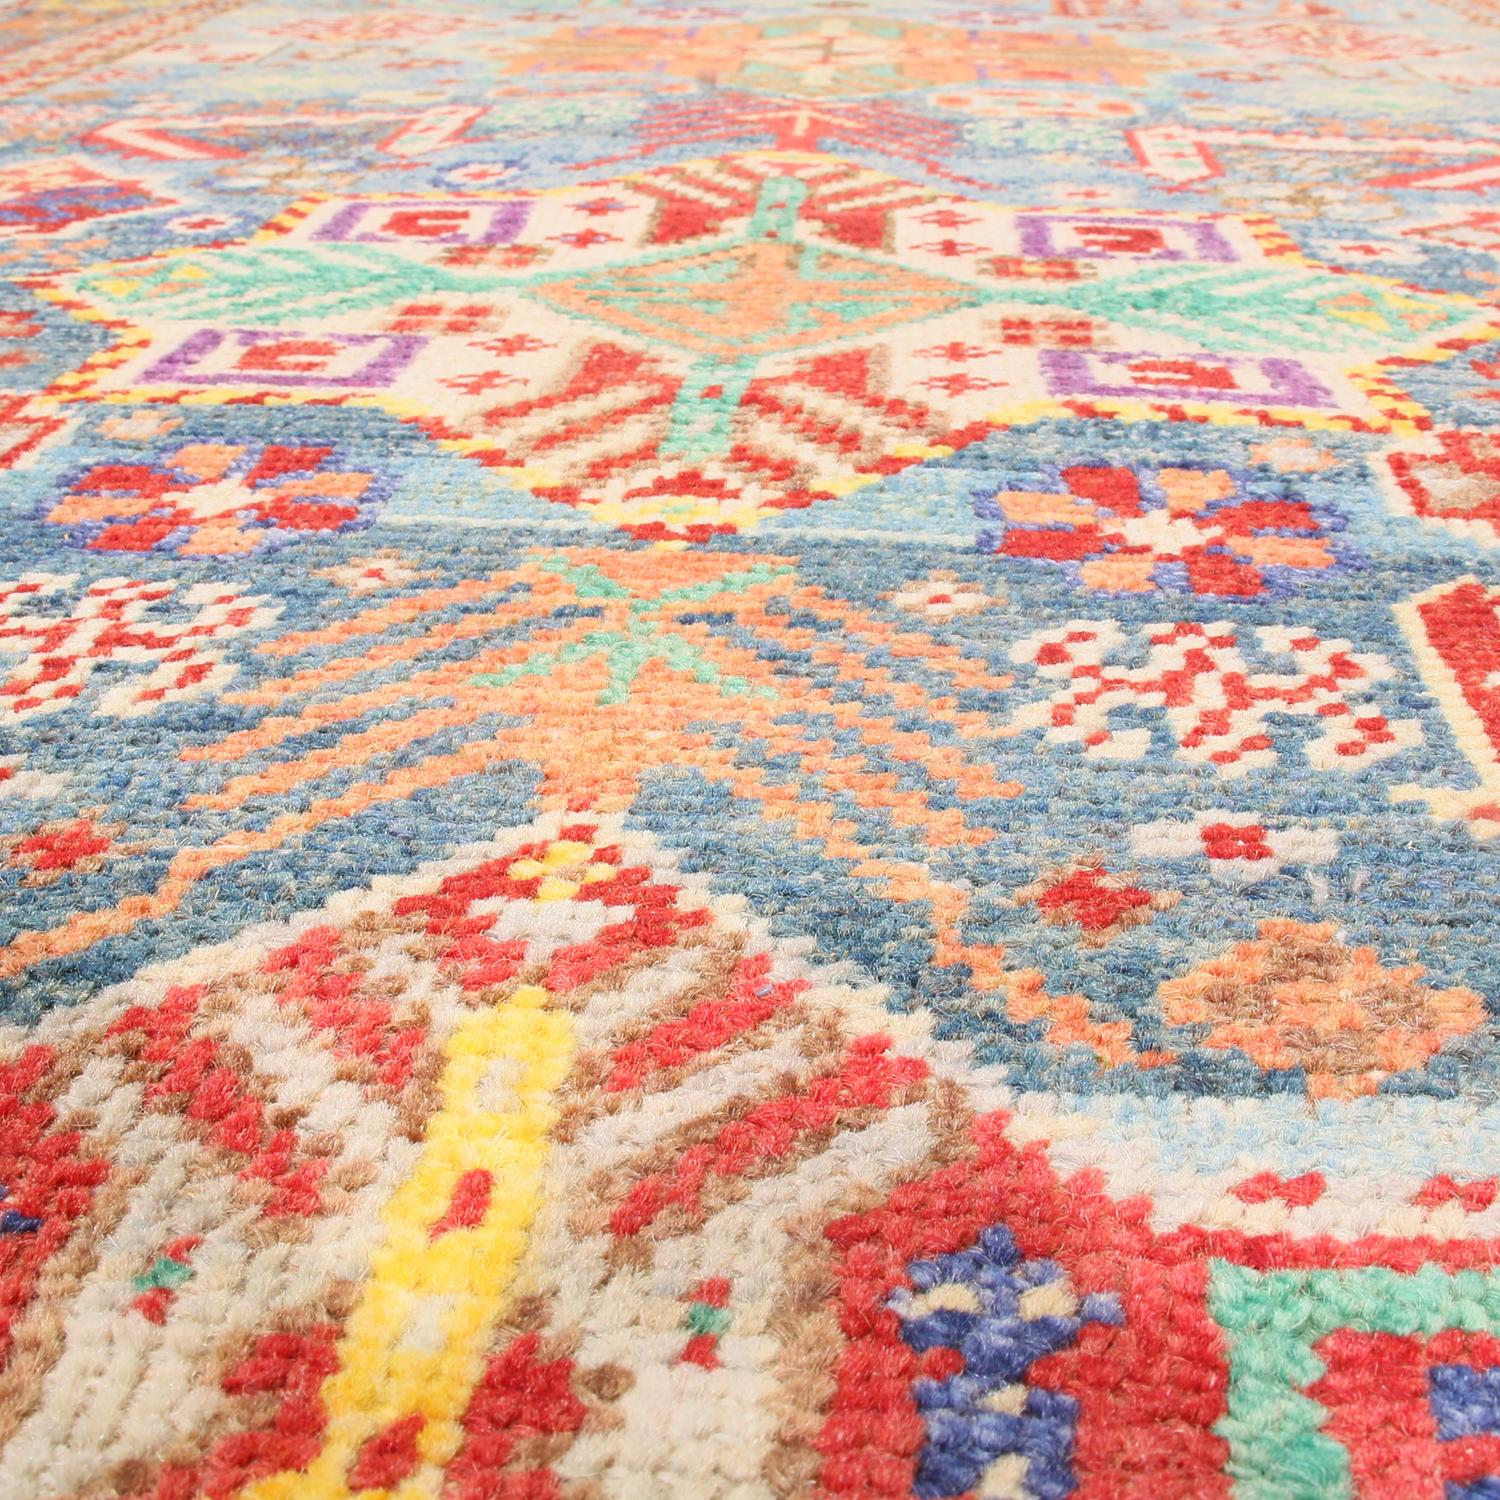 Hand-Knotted Contemporary Rajasthan Tribal Red and Blue Multi-Color Wool Rug